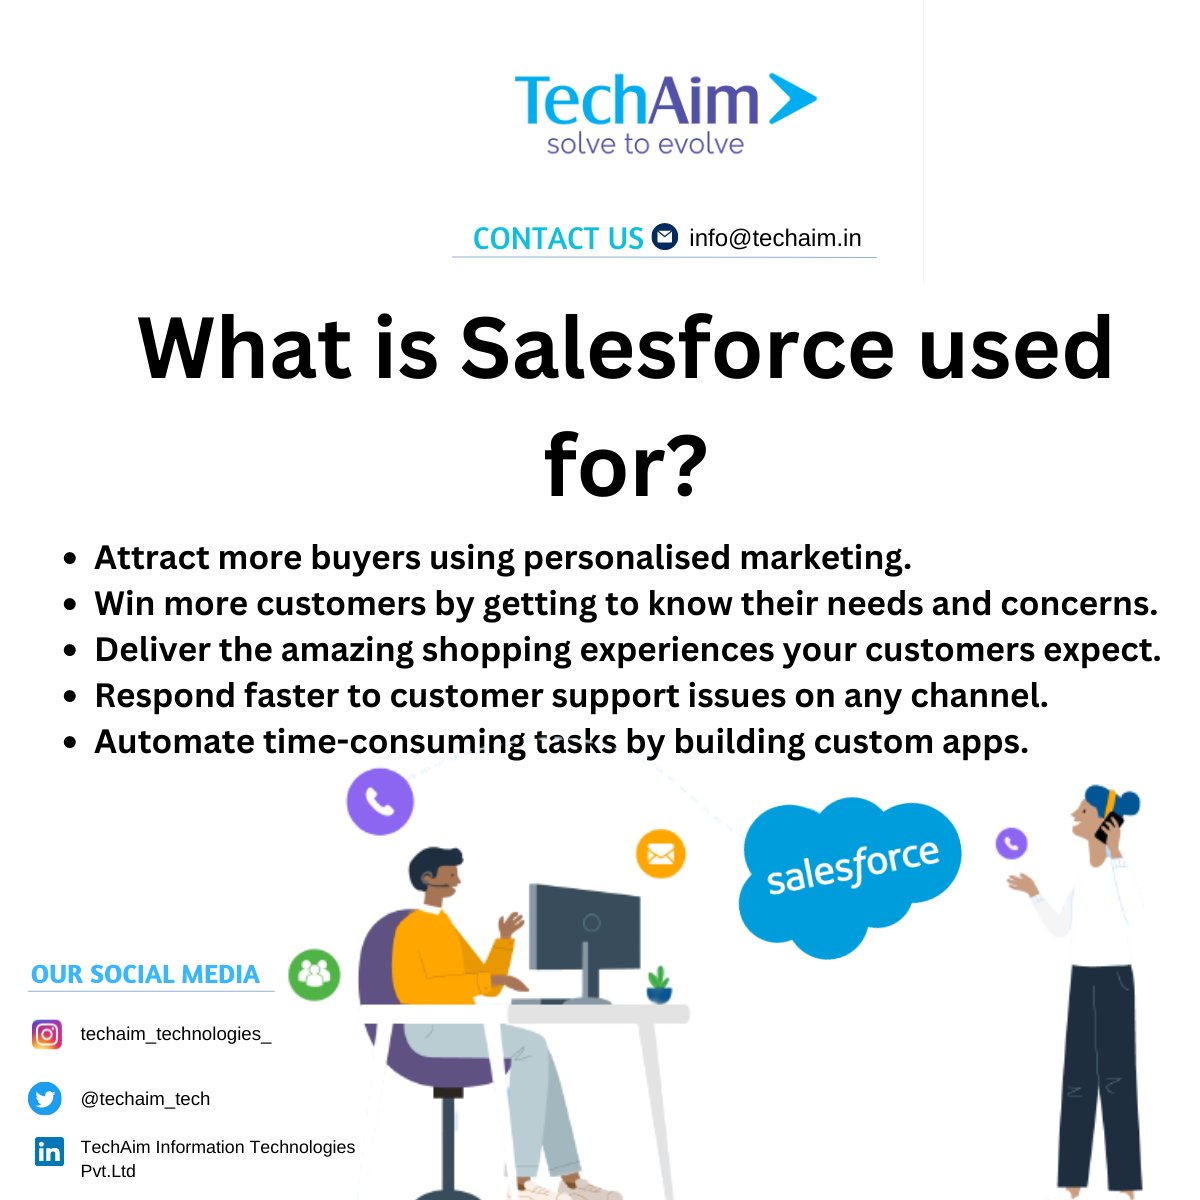 Transform Your Business with Techaim: An authorised salesforce reseller - A Comprehensive and Scalable #CRM Platform with Powerful Analytics, Customization, and AppExchange Marketplace.

#crm #techaim #salesforce #businessgrowth #customisation